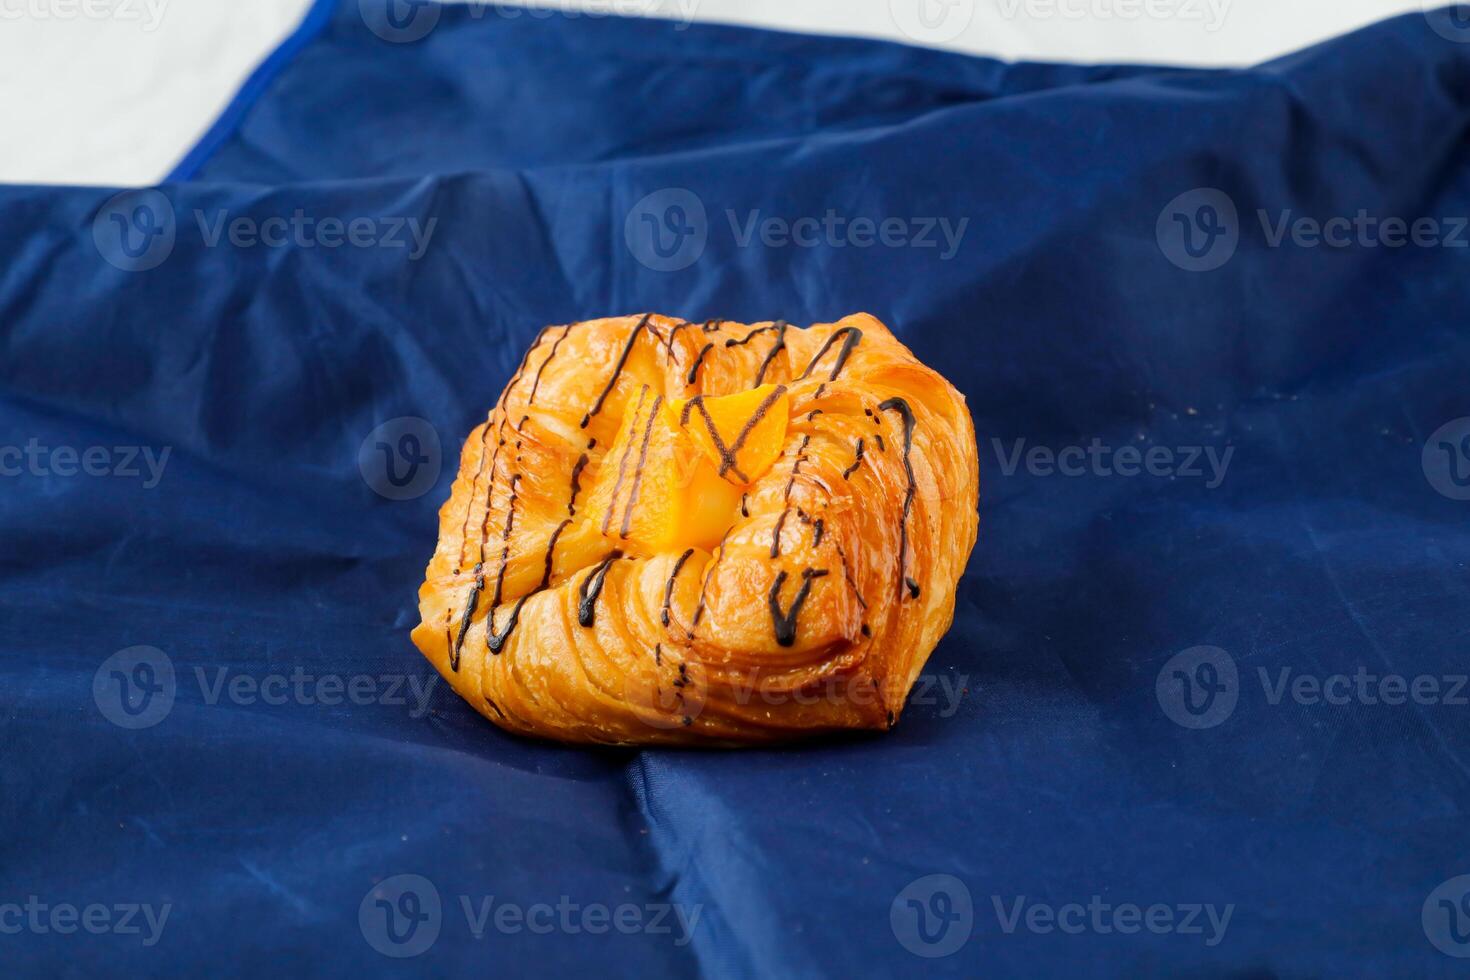 Peach Danish pastry puff isolated on blue napkin side view of french breakfast baked food item photo